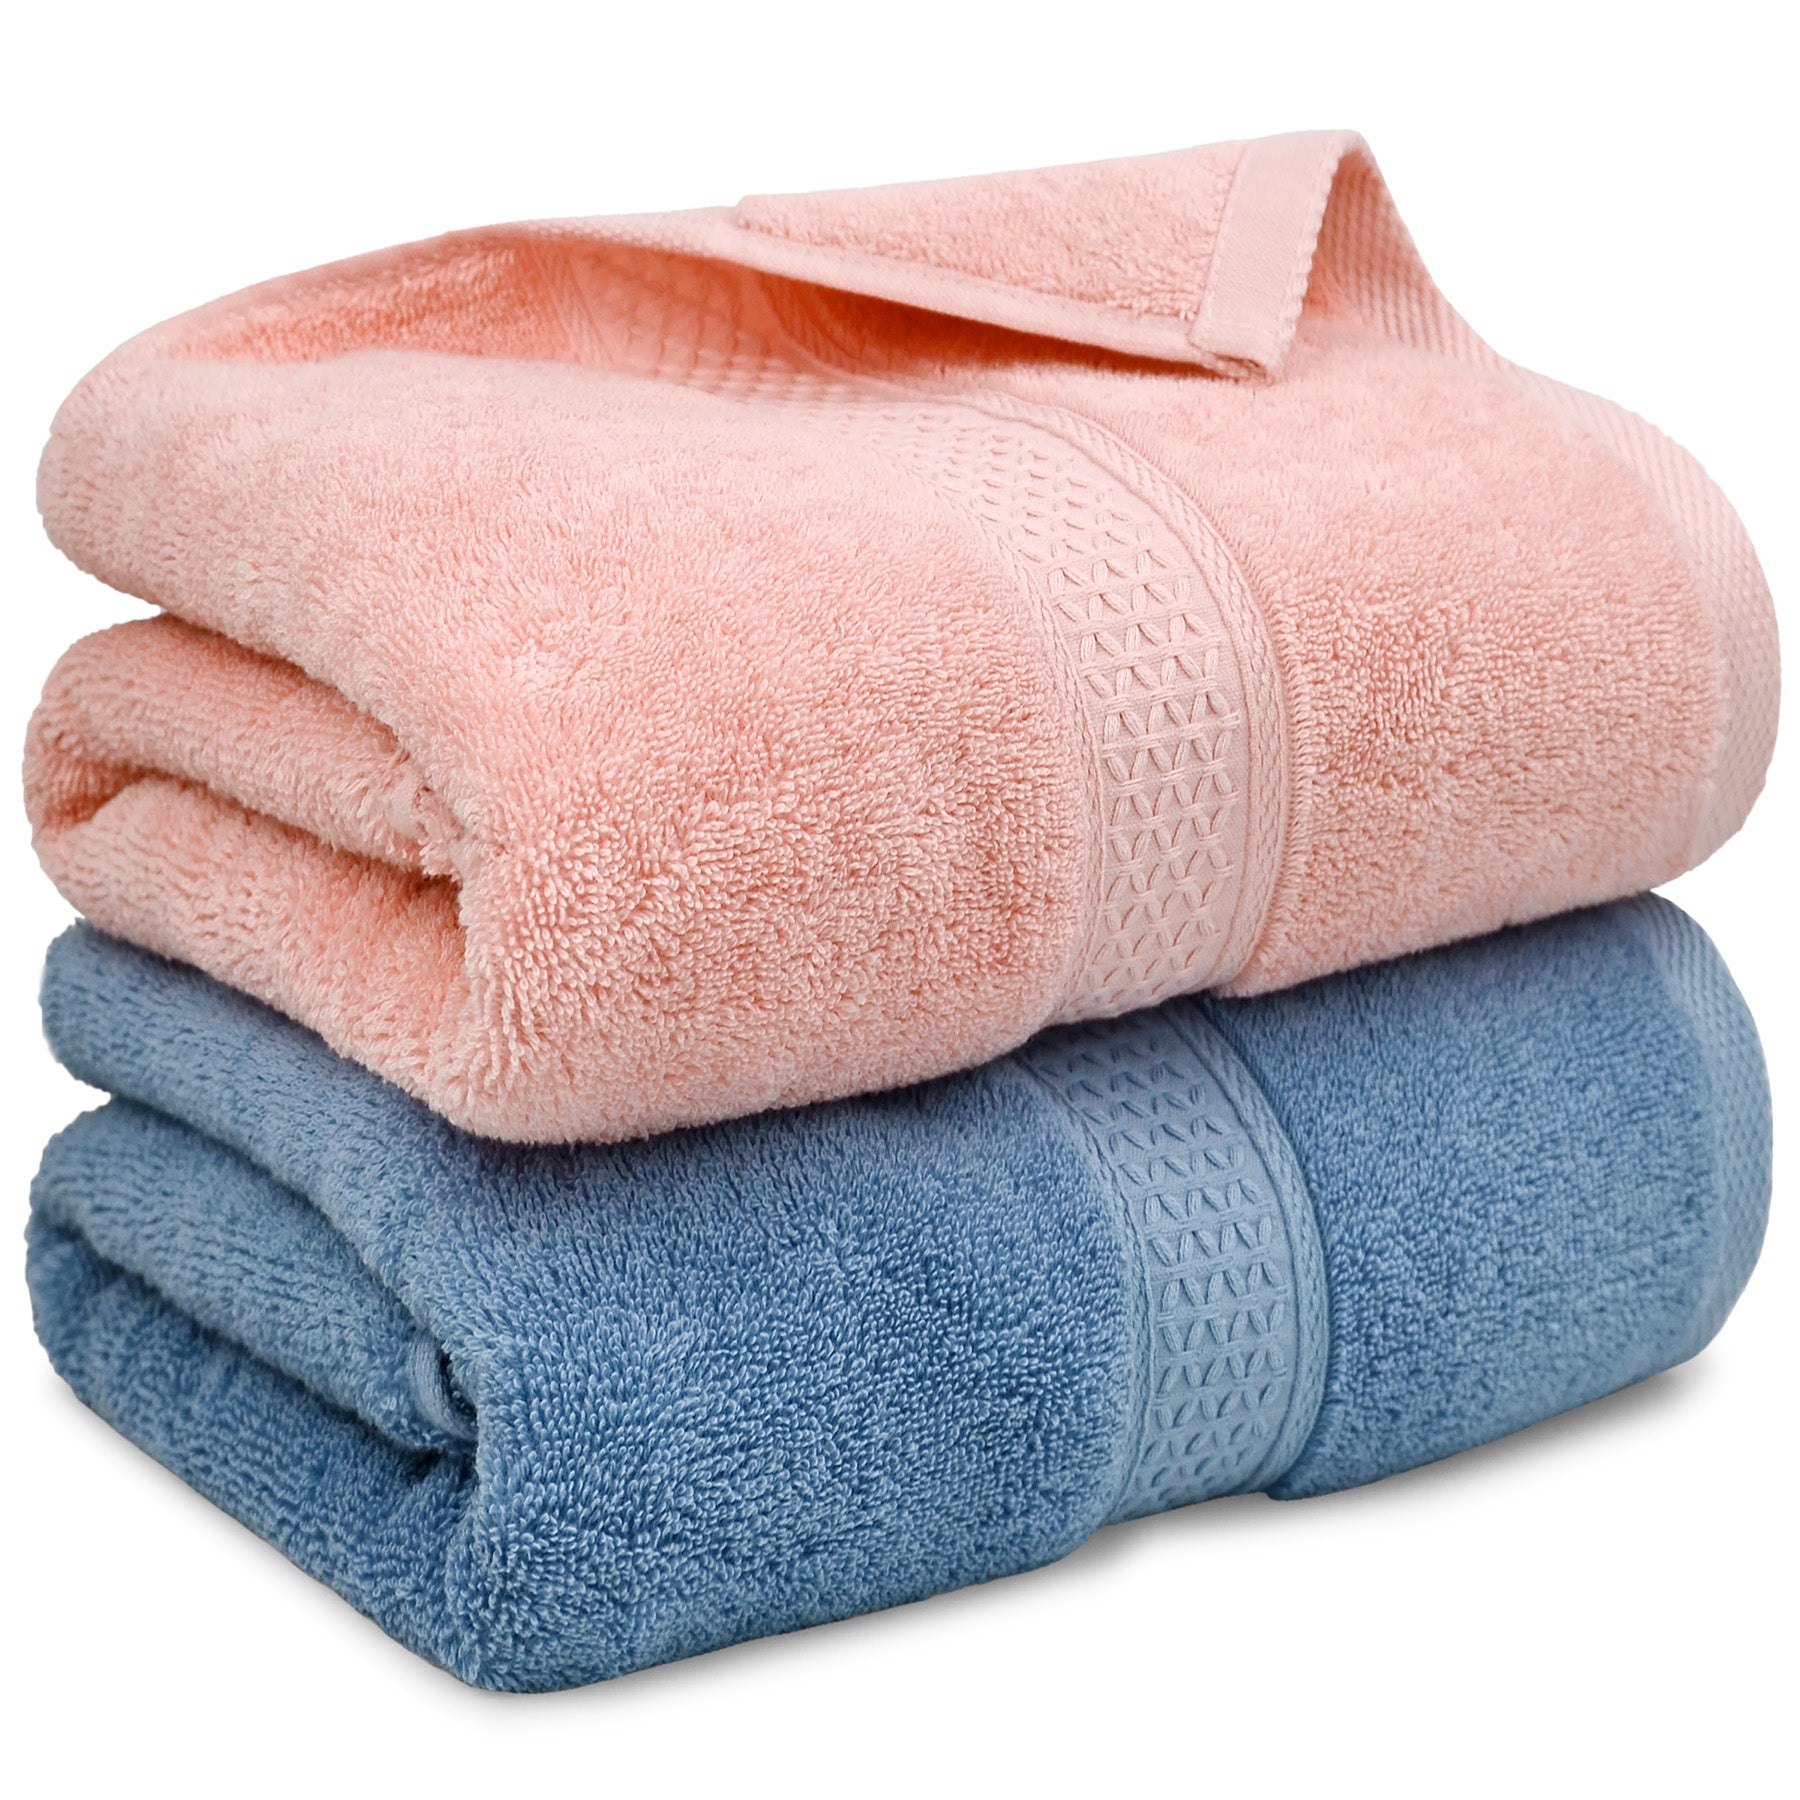 Cleanbear Cotton Hand Towel Thick Bathroom Towels - 2 Pack Peacock Blue